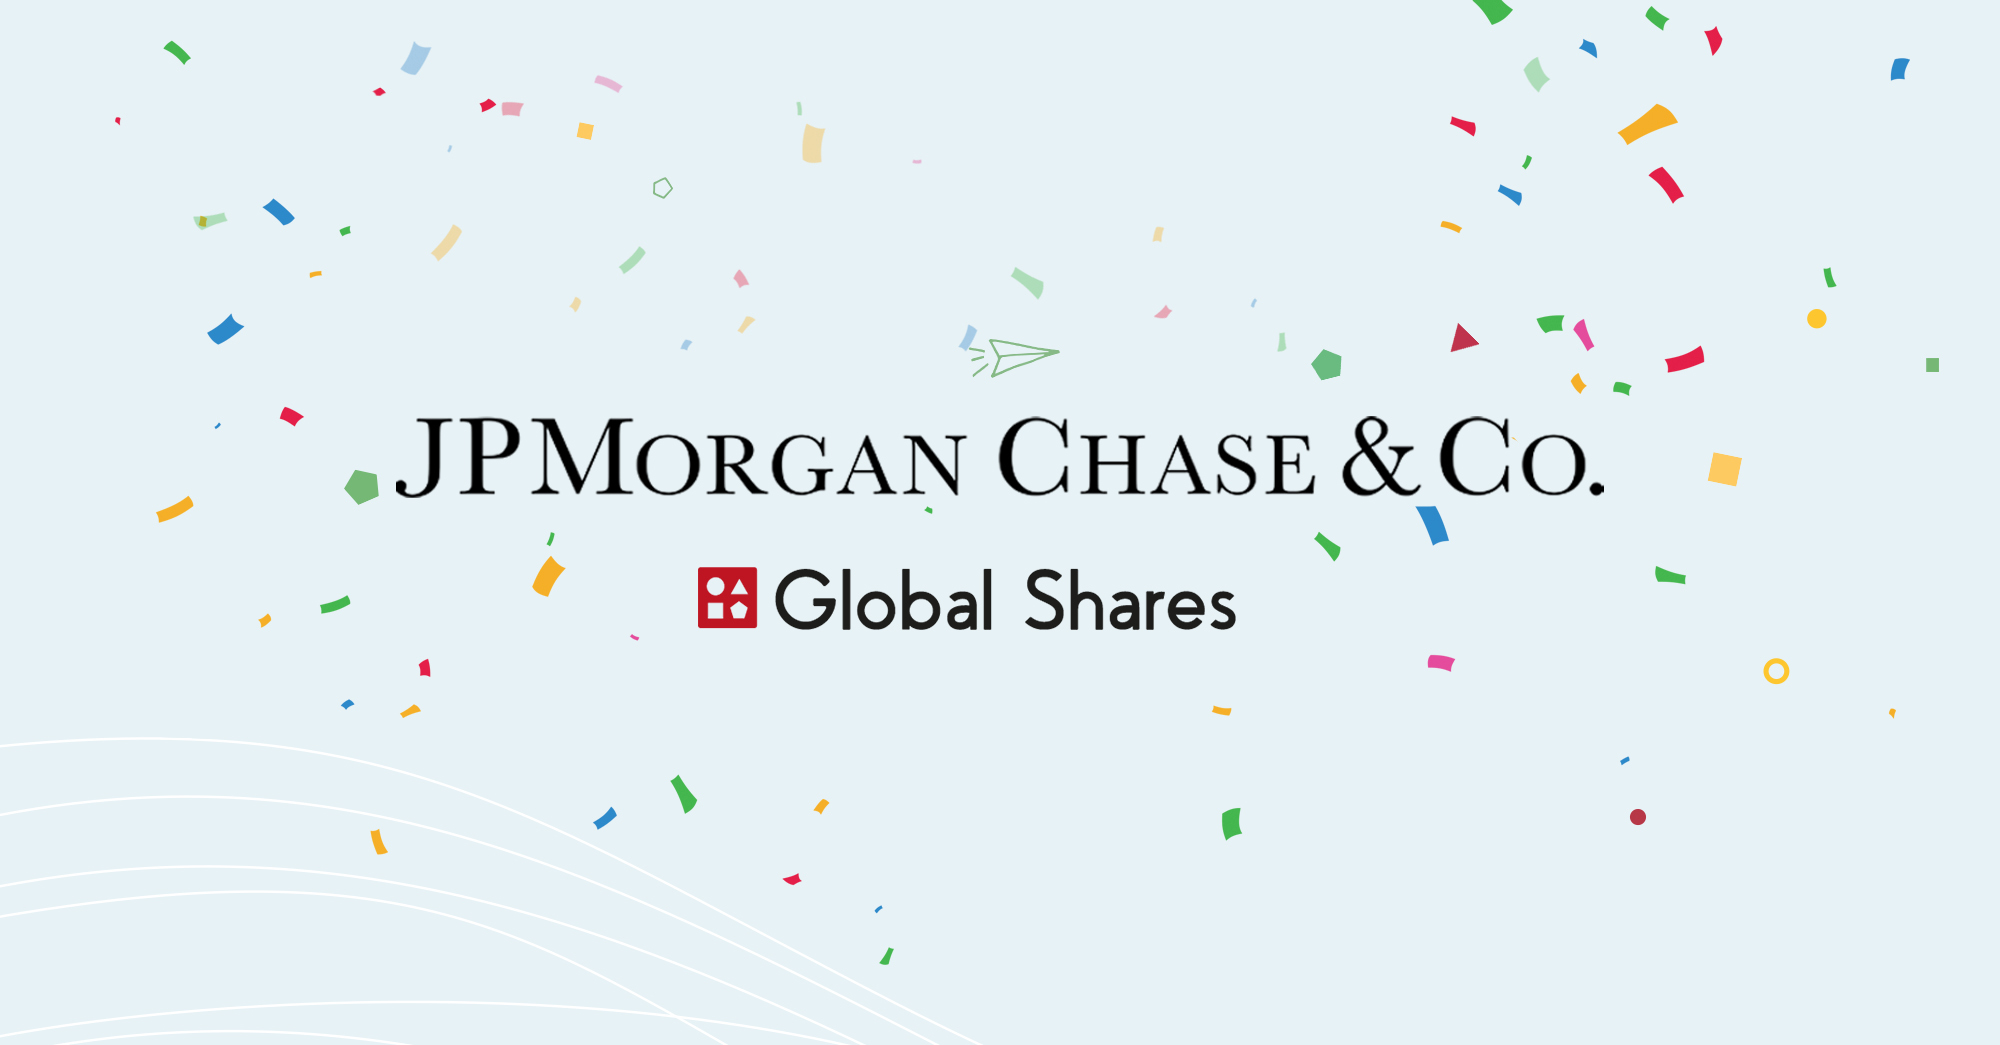 We’re joining forces with J.P. Morgan!